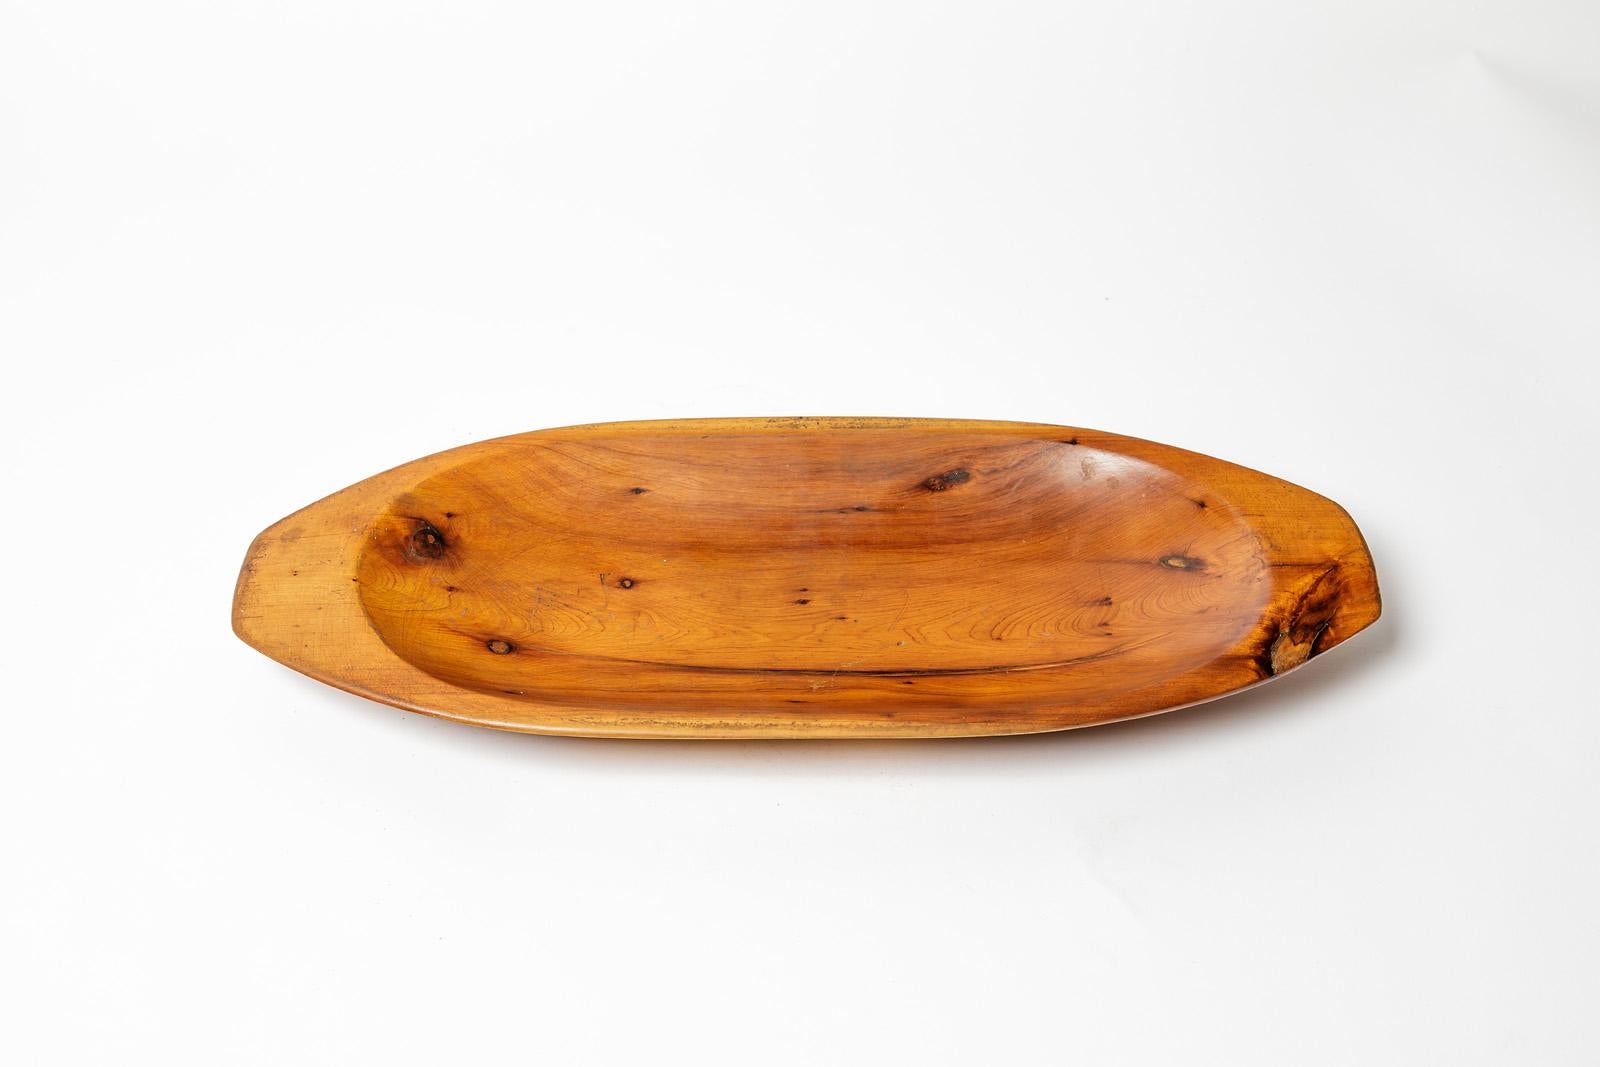 French design - 20th century - In the style of Alexandre Noll

Realised circa 1950

Olive wood sculptural plate or dish / vide poche

Original good condition

Measures: Height : 4 cm Large : 20 cm Long : 47 cm.